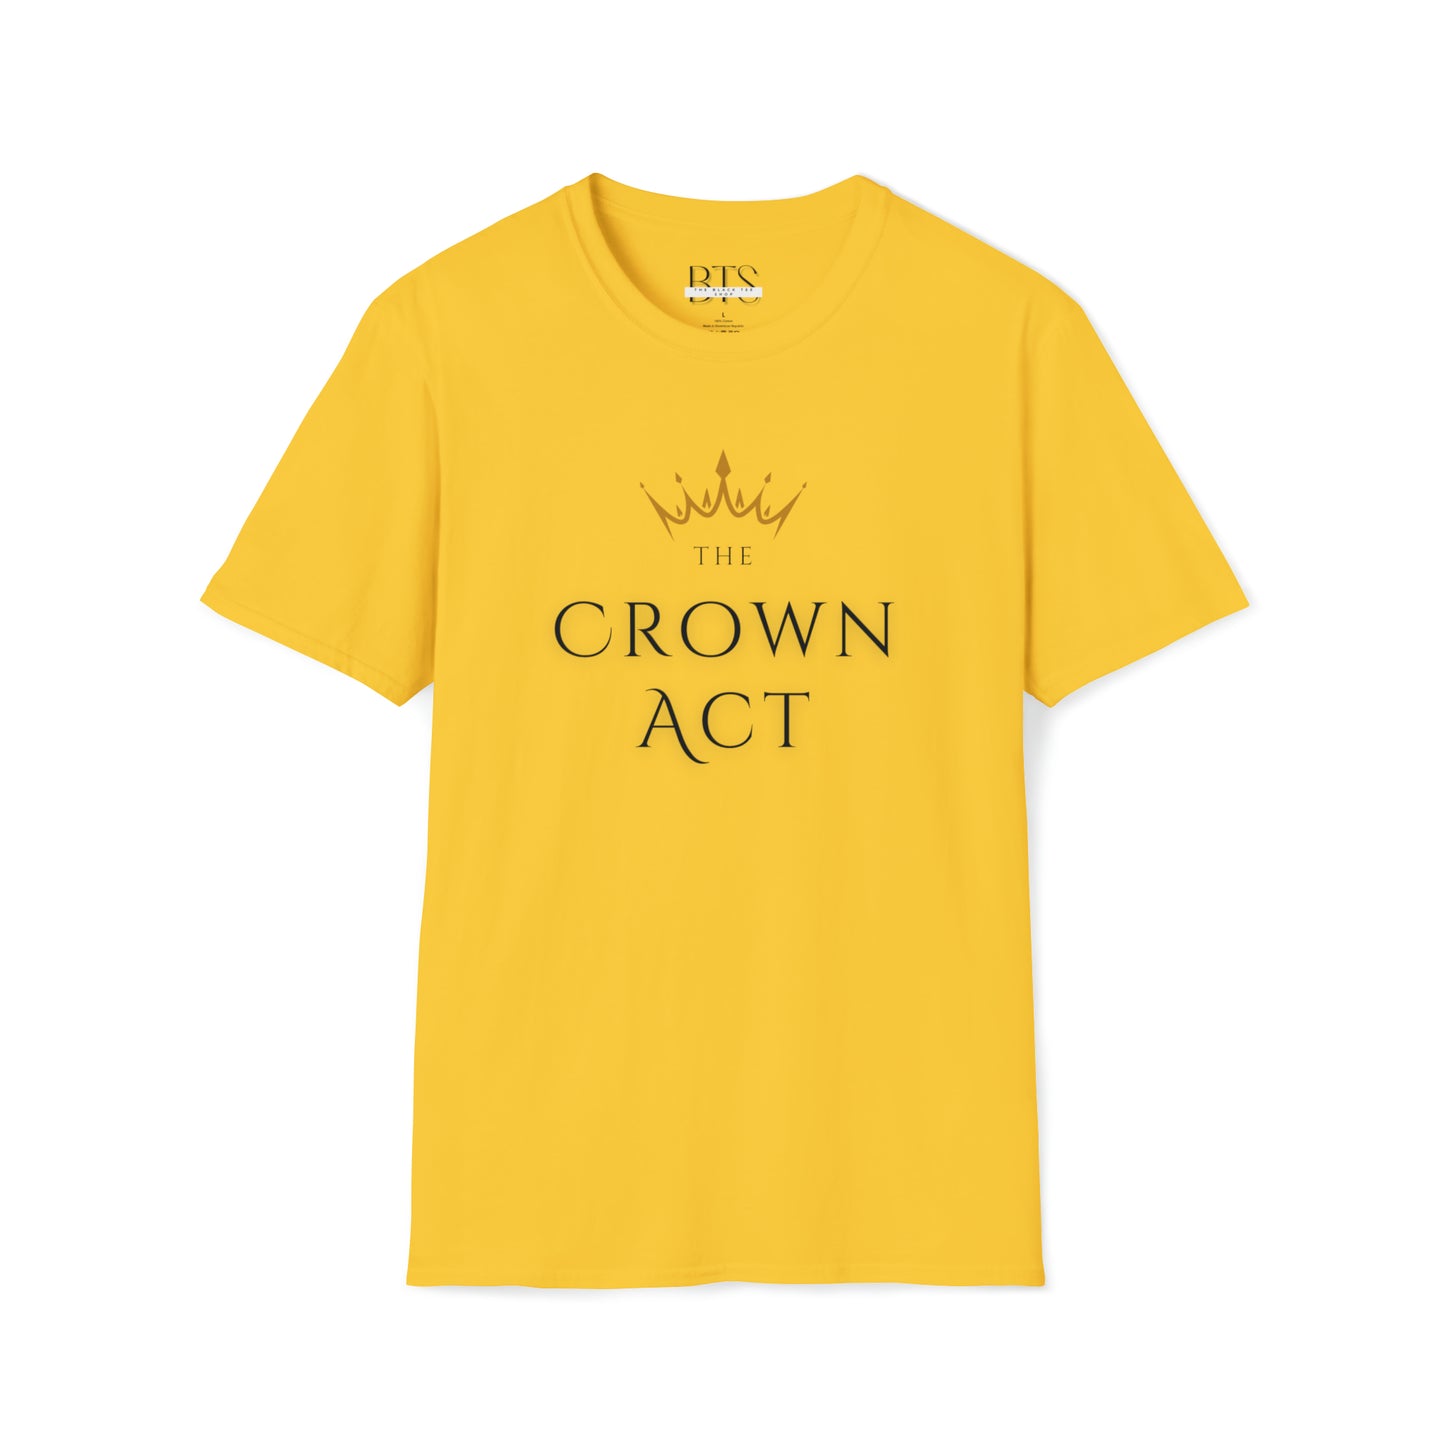 The Crown Act Unisex Softstyle T-Shirt